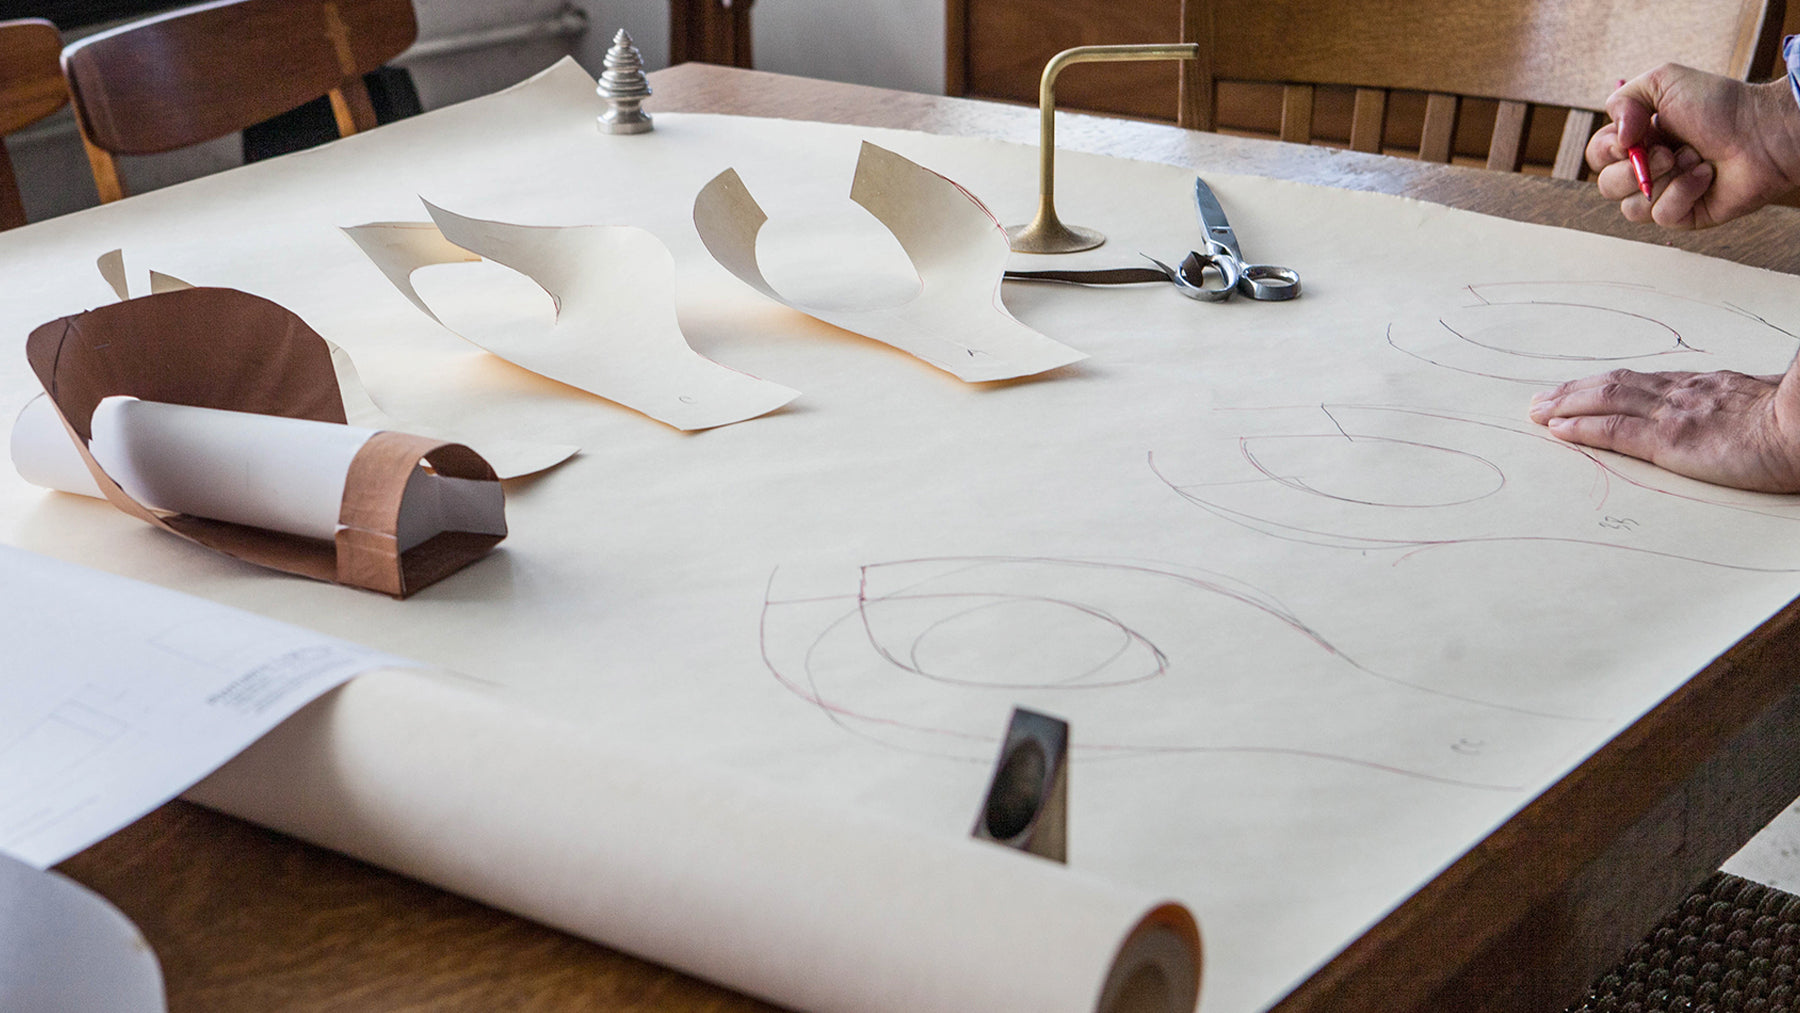 Sketches and paper and cardboard cut outs of shapes being used to design and mock up new fixture designs for the miner's lantern included in the Presidio by Hart Howerton lighting collection